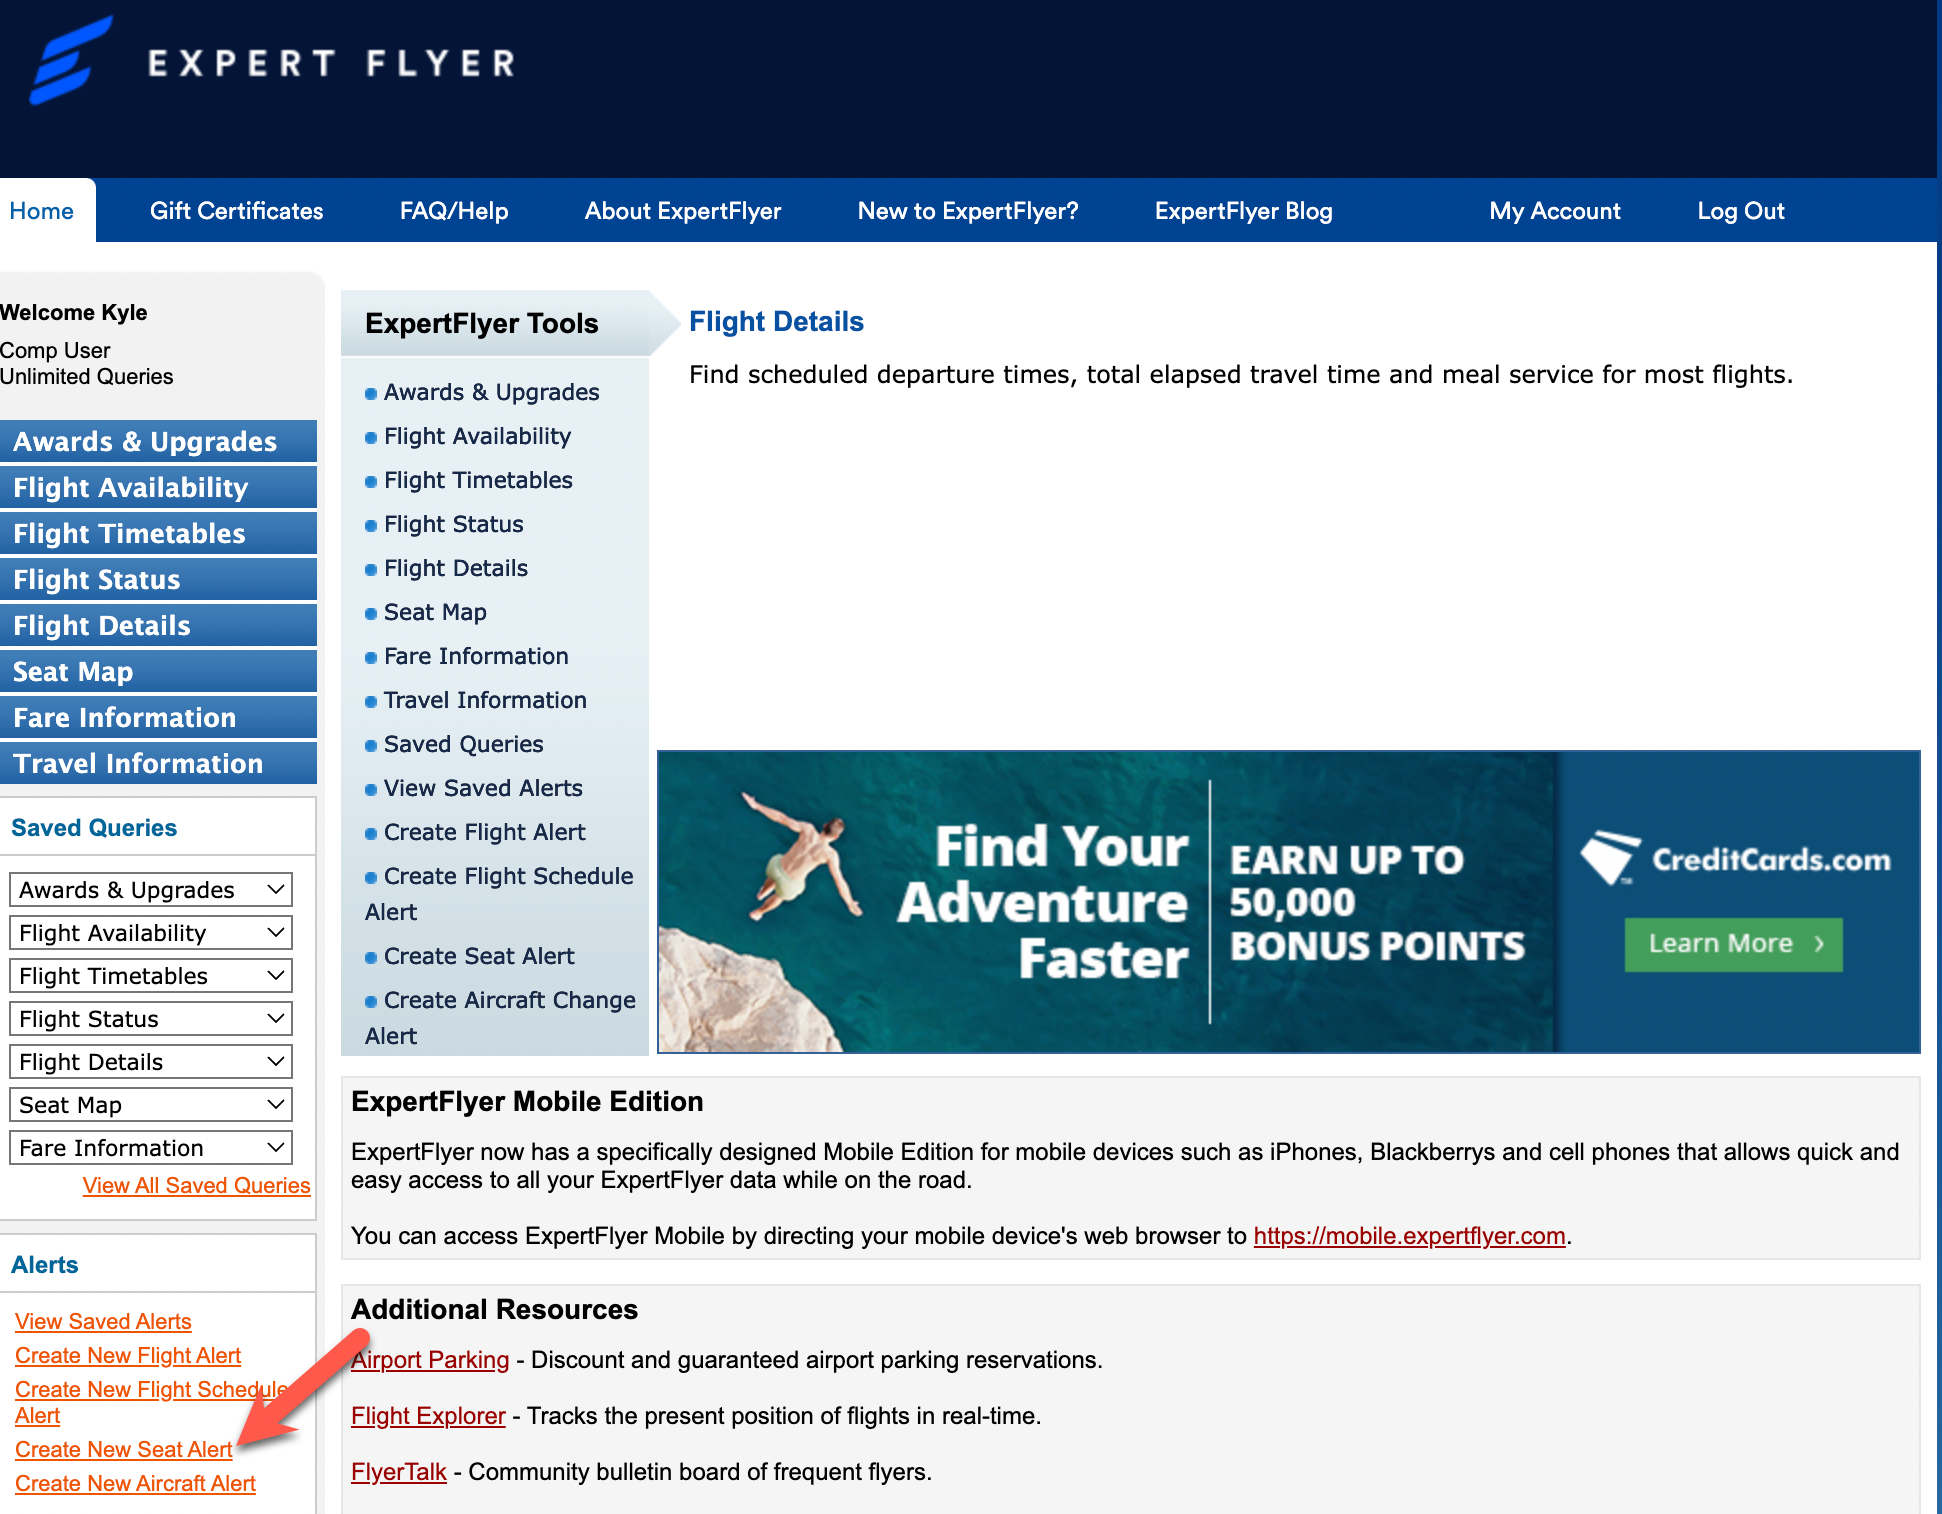 Finding the seat alert feature on the ExpertFlyer homepage